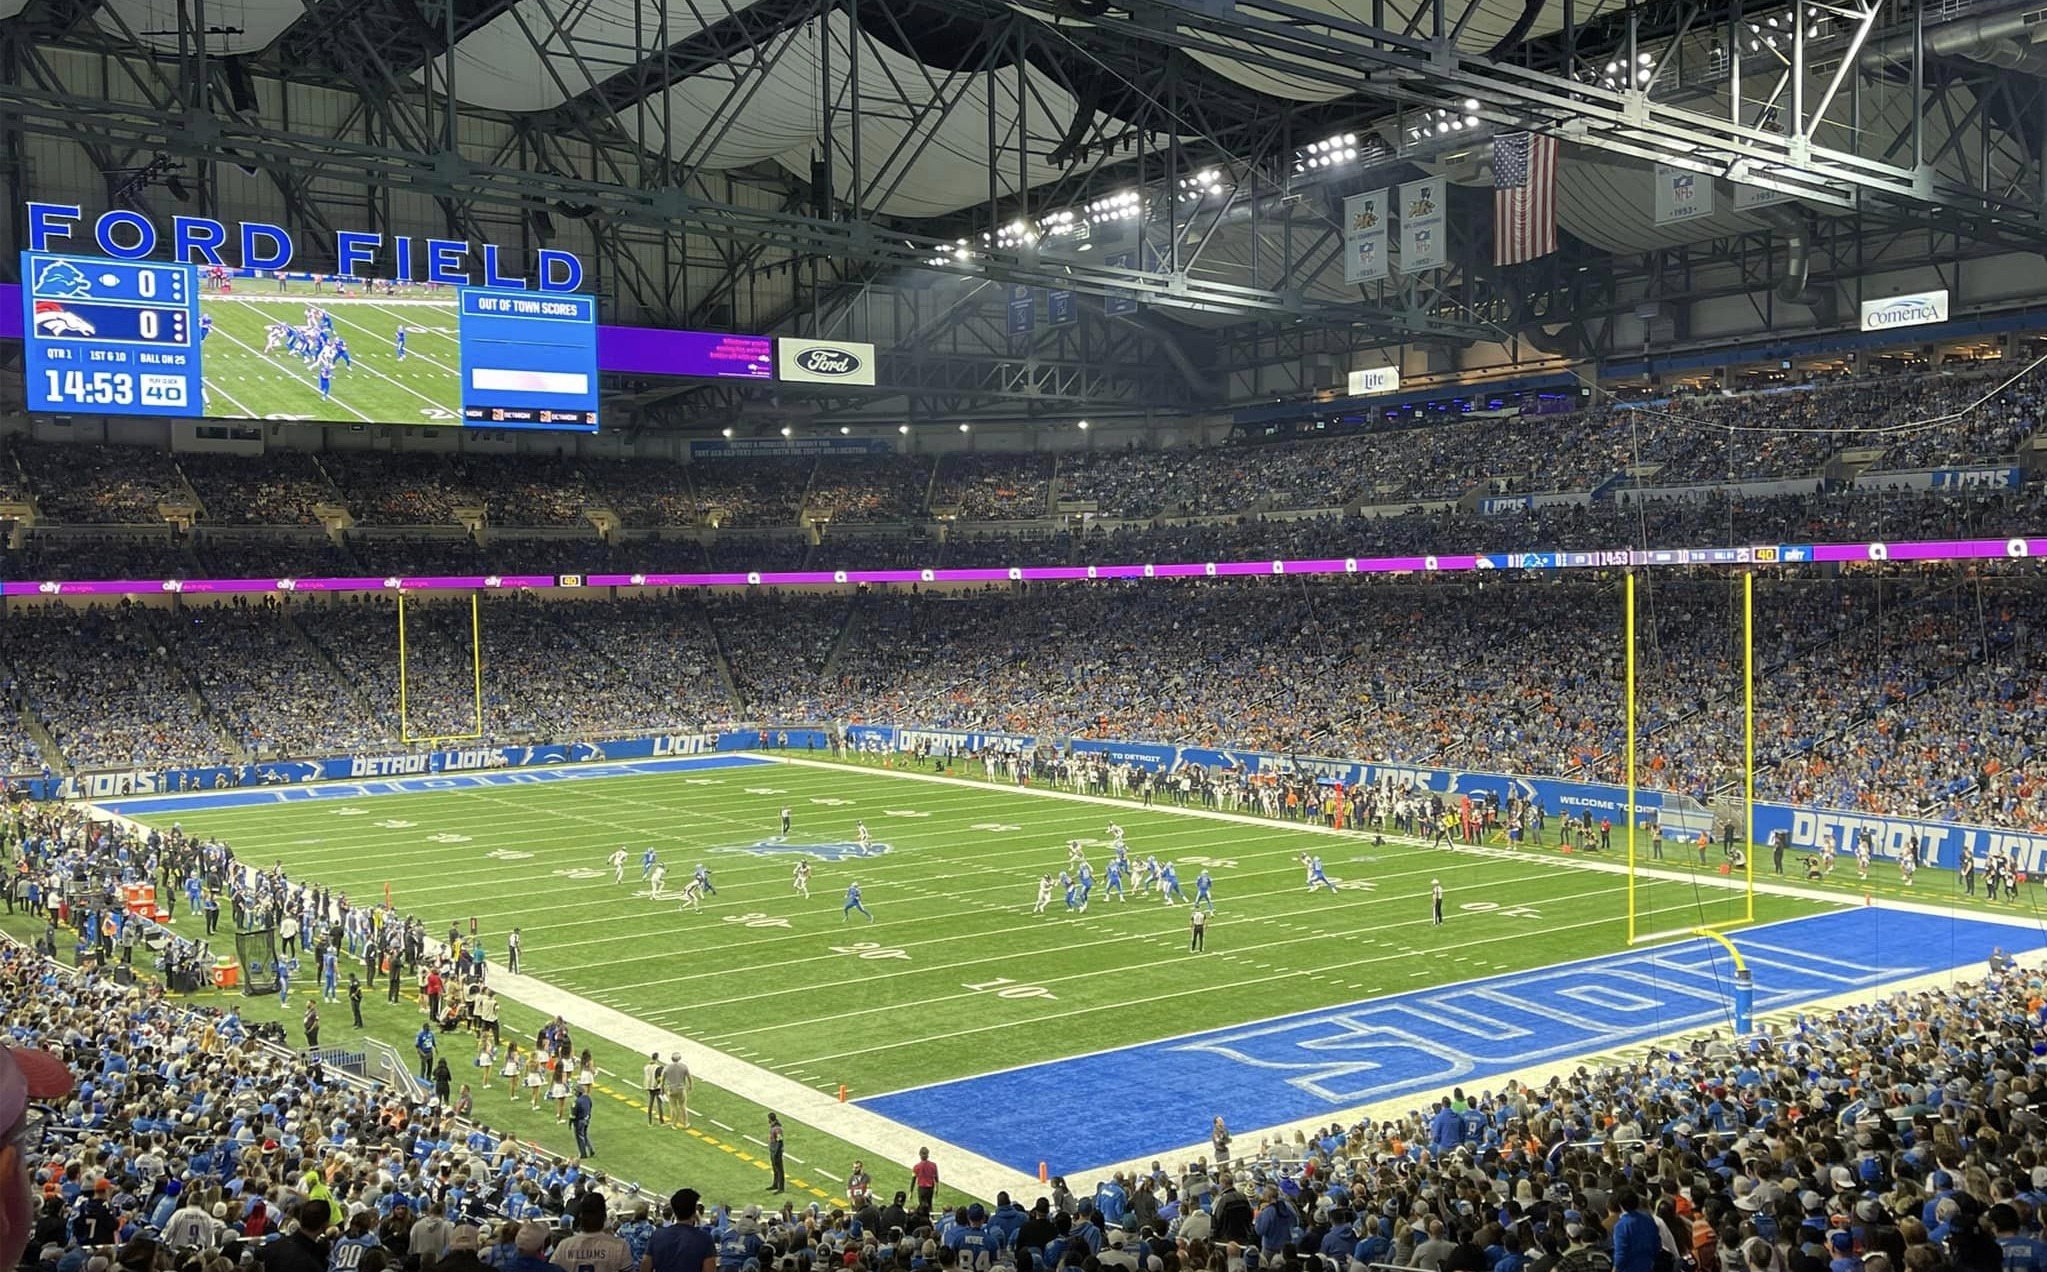 View of the playing field at Ford Field, home of the Detroit Lions